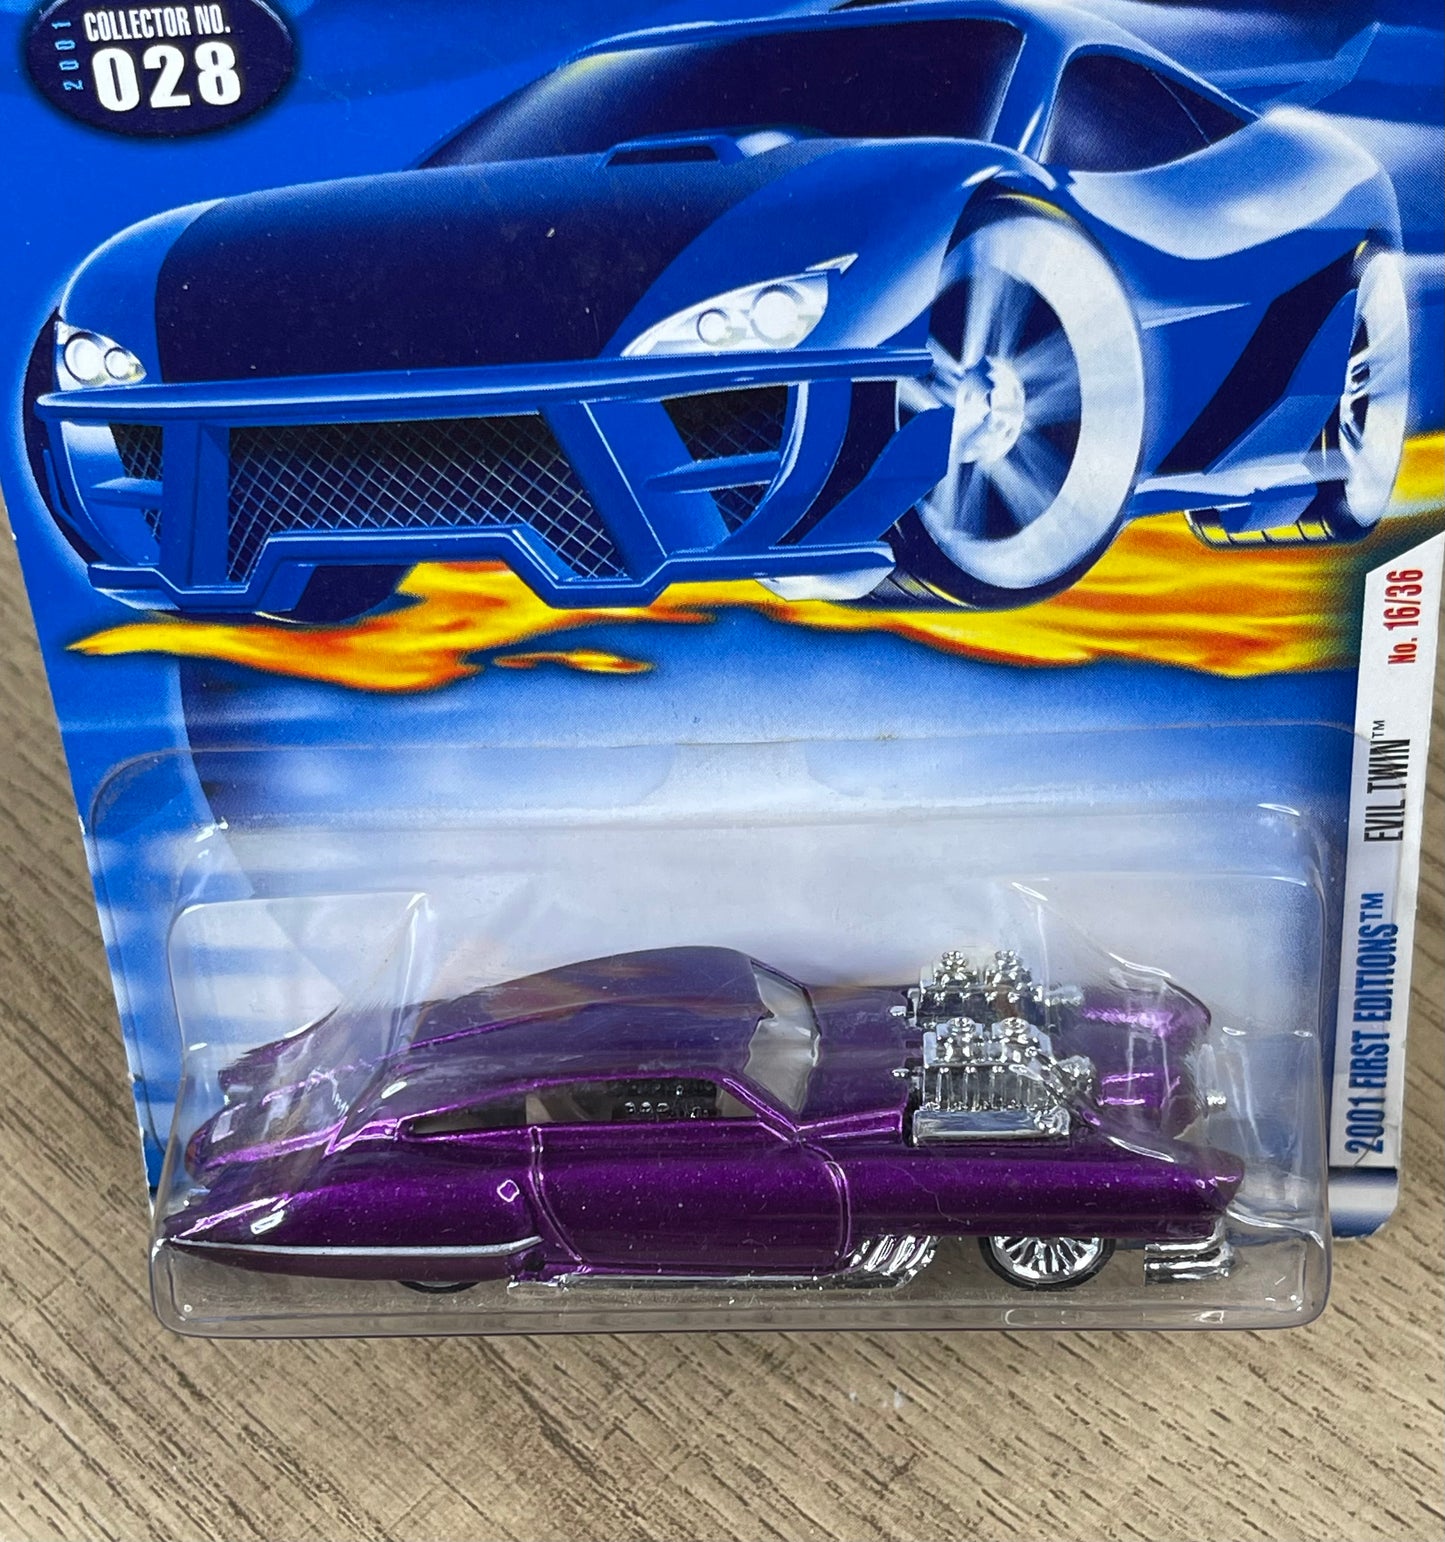 Hot Wheels 2001 First Edition “Evil Twin”  Die Cast Car